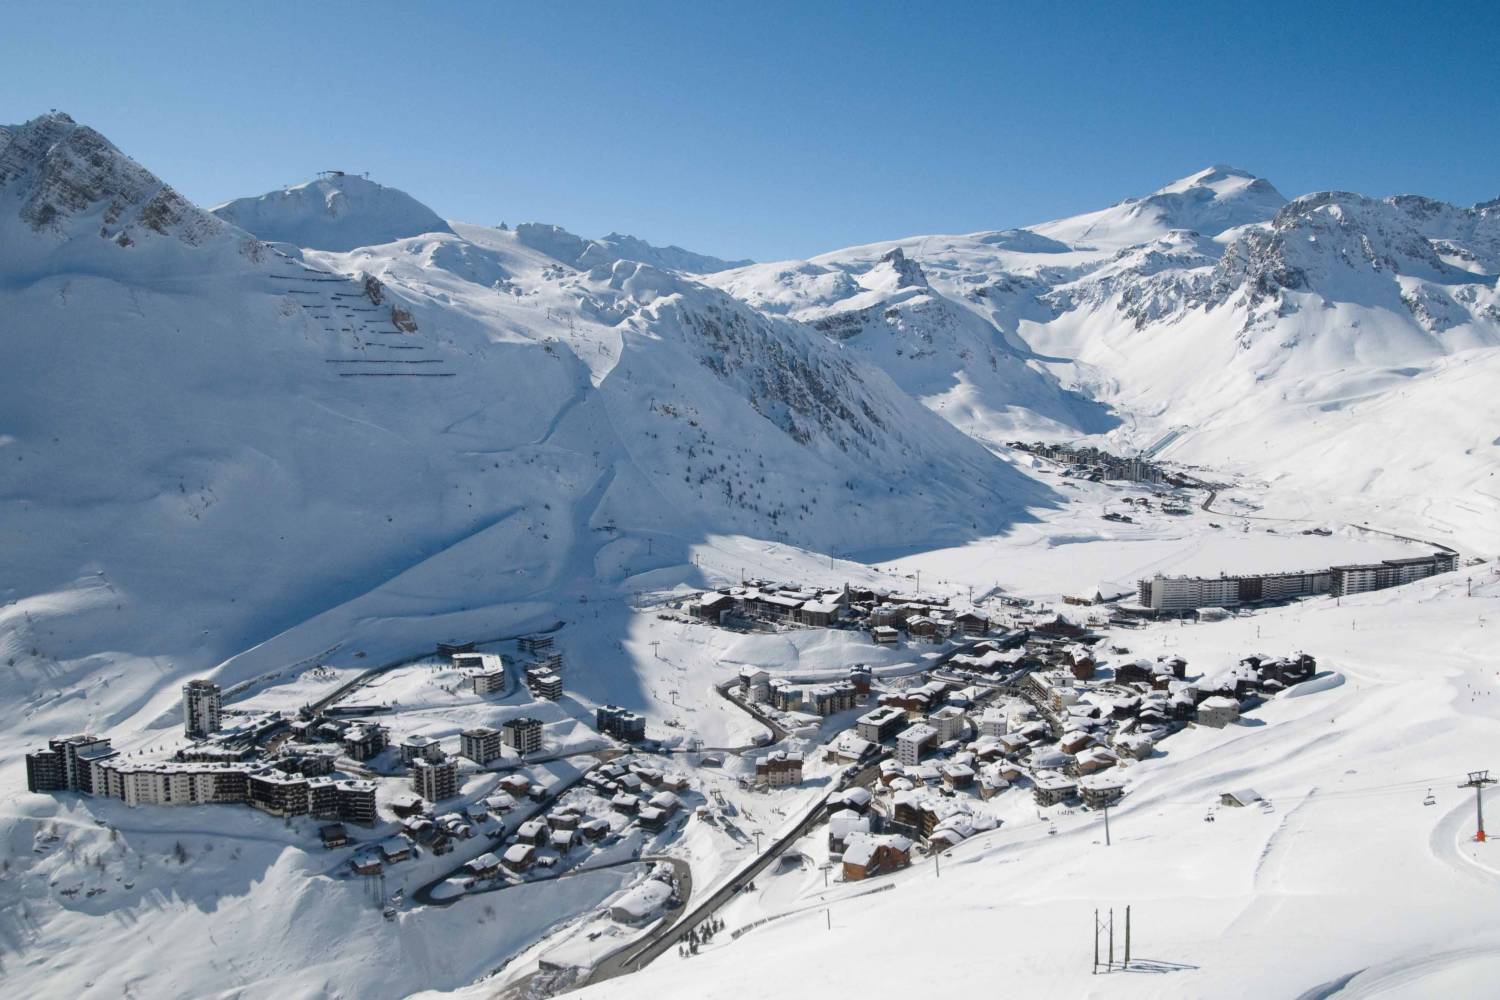 Enjoy a private chef after an amazing ski day in Tignes - Take a Chef